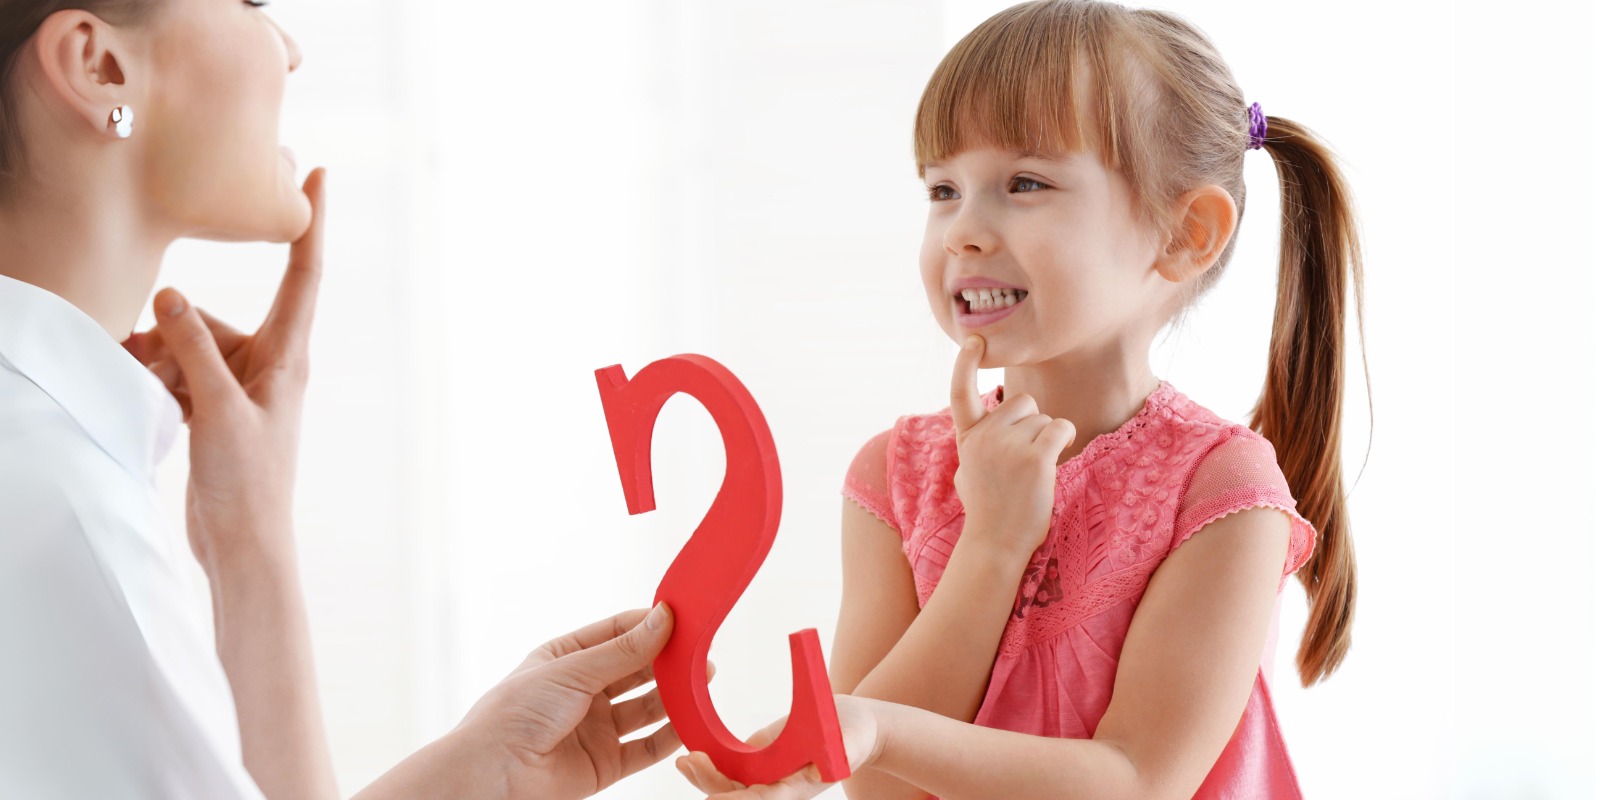 A speech therapist working with a child, engaging activities during a speech therapy session."